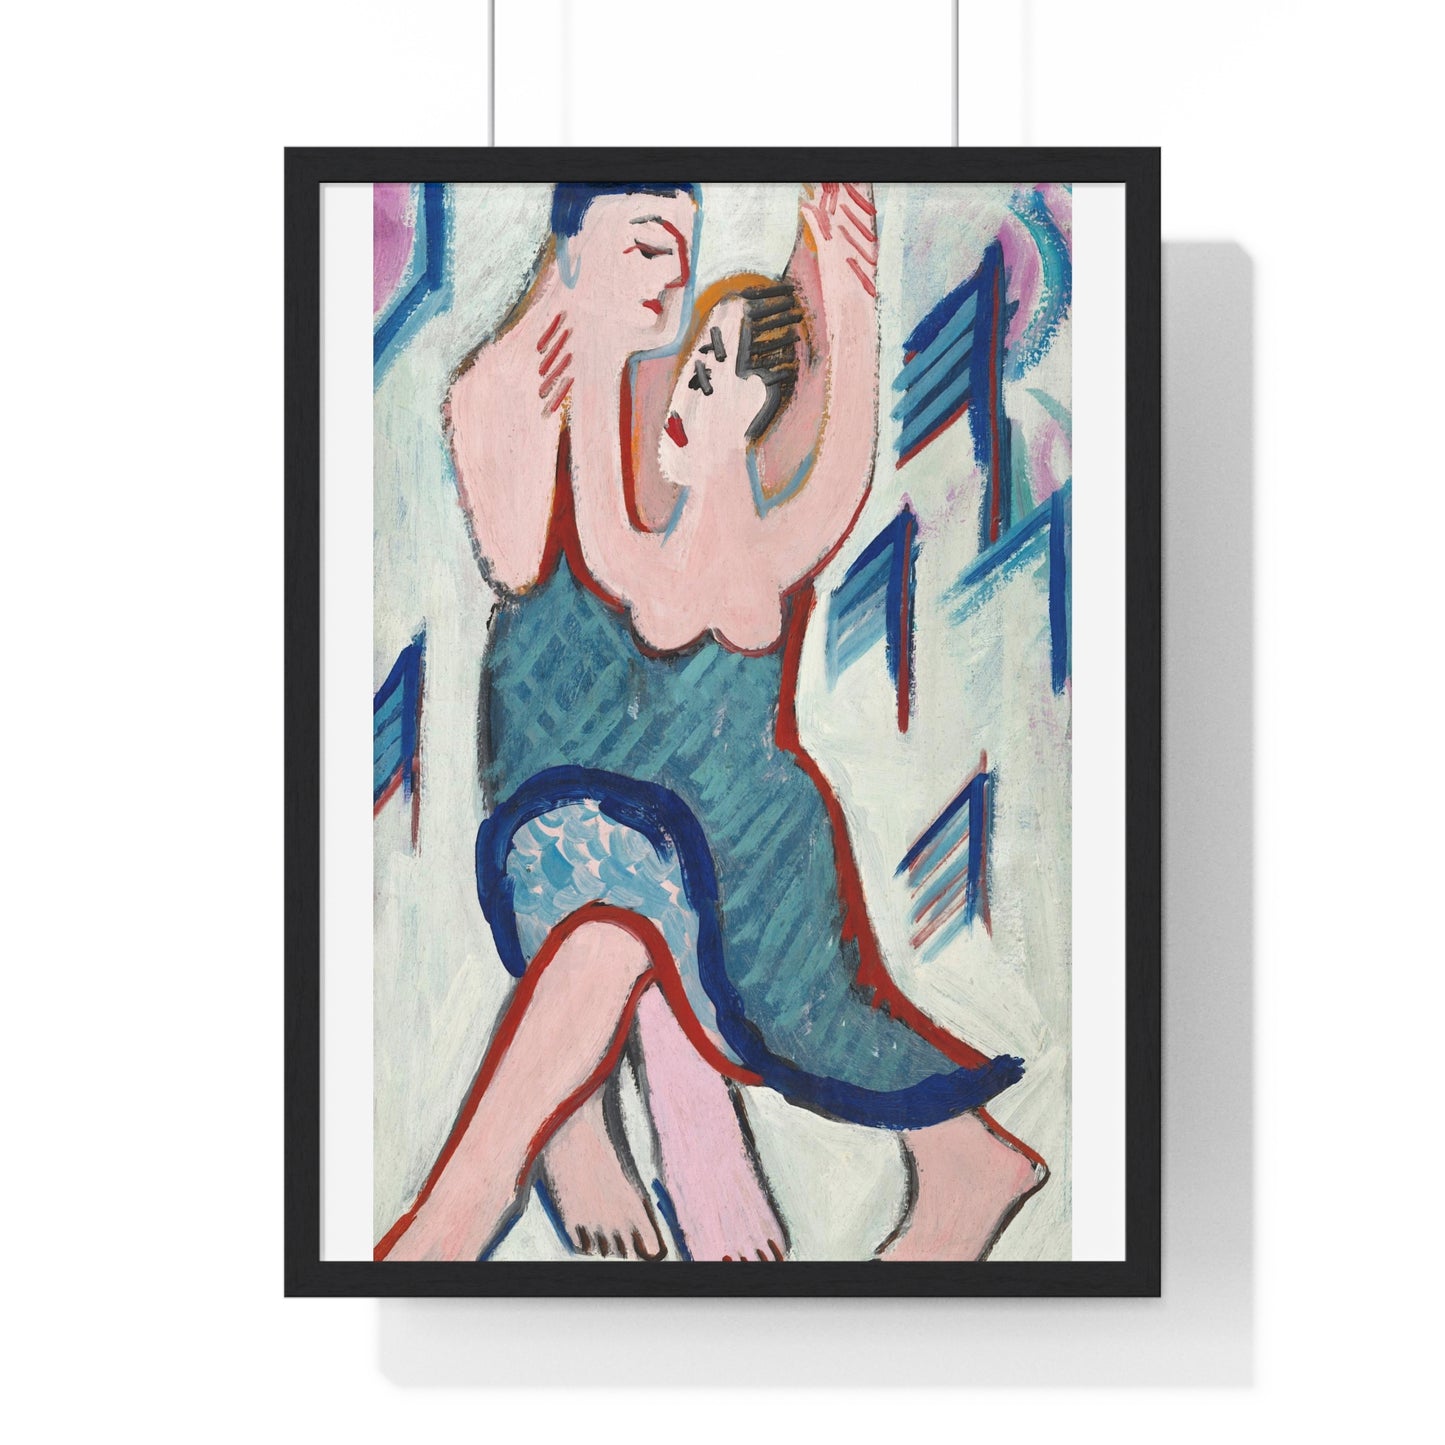 Dancing Couple in the Snow [reverse] by Ernst Ludwig Kirchner (1928–1929) from the Original, Framed Art Print